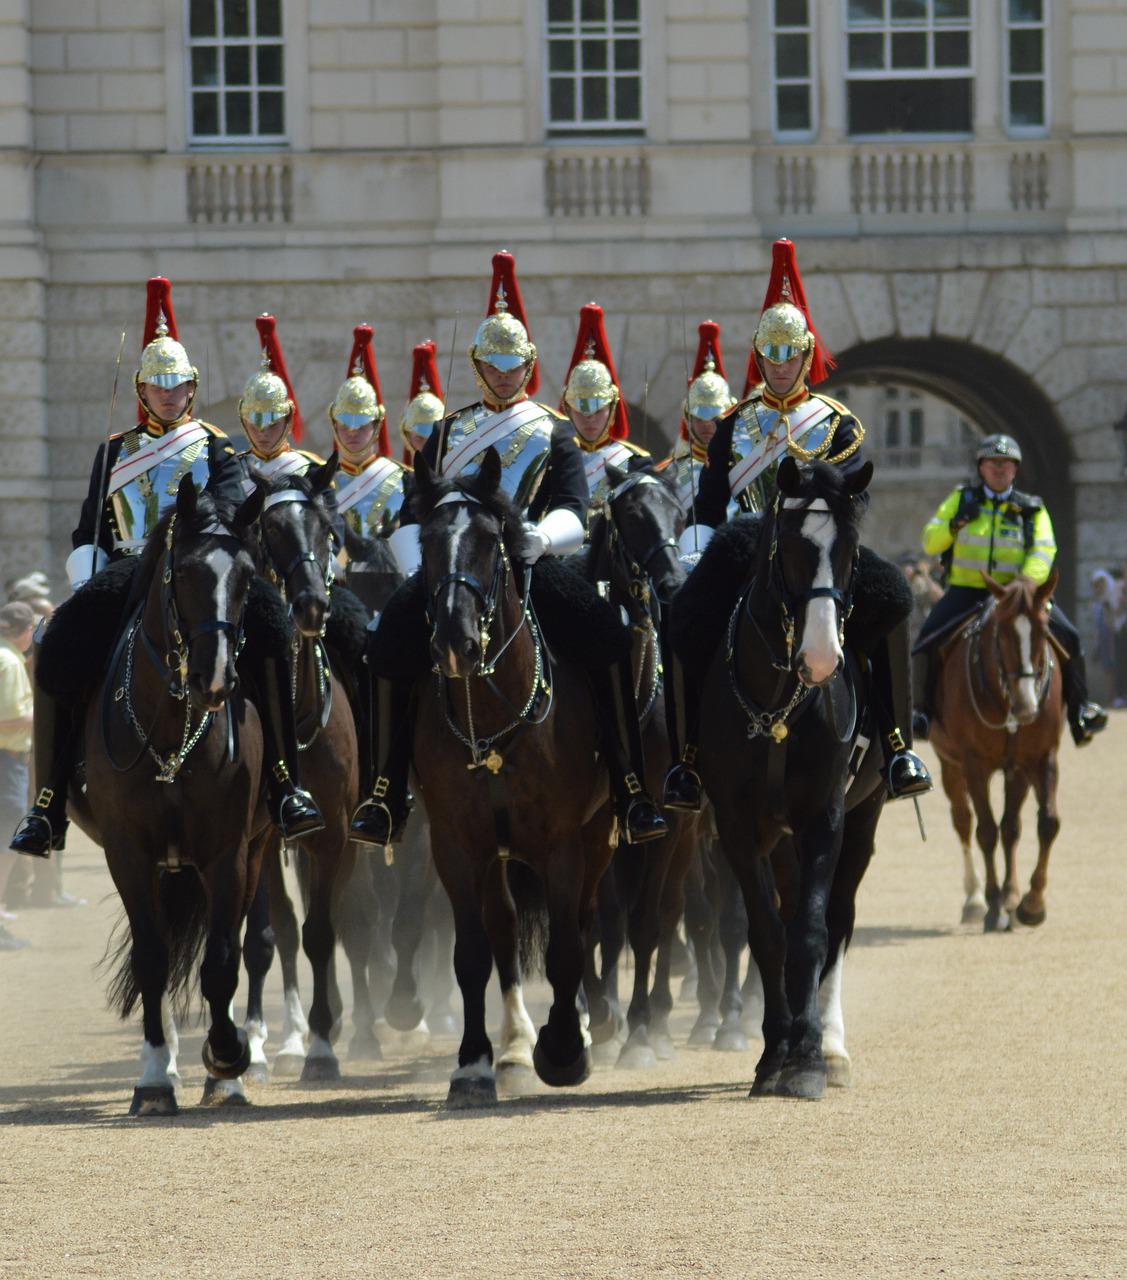 Phamie’s music chosen for The Musical Military Spectacular Show at Horse Guard Parade, London